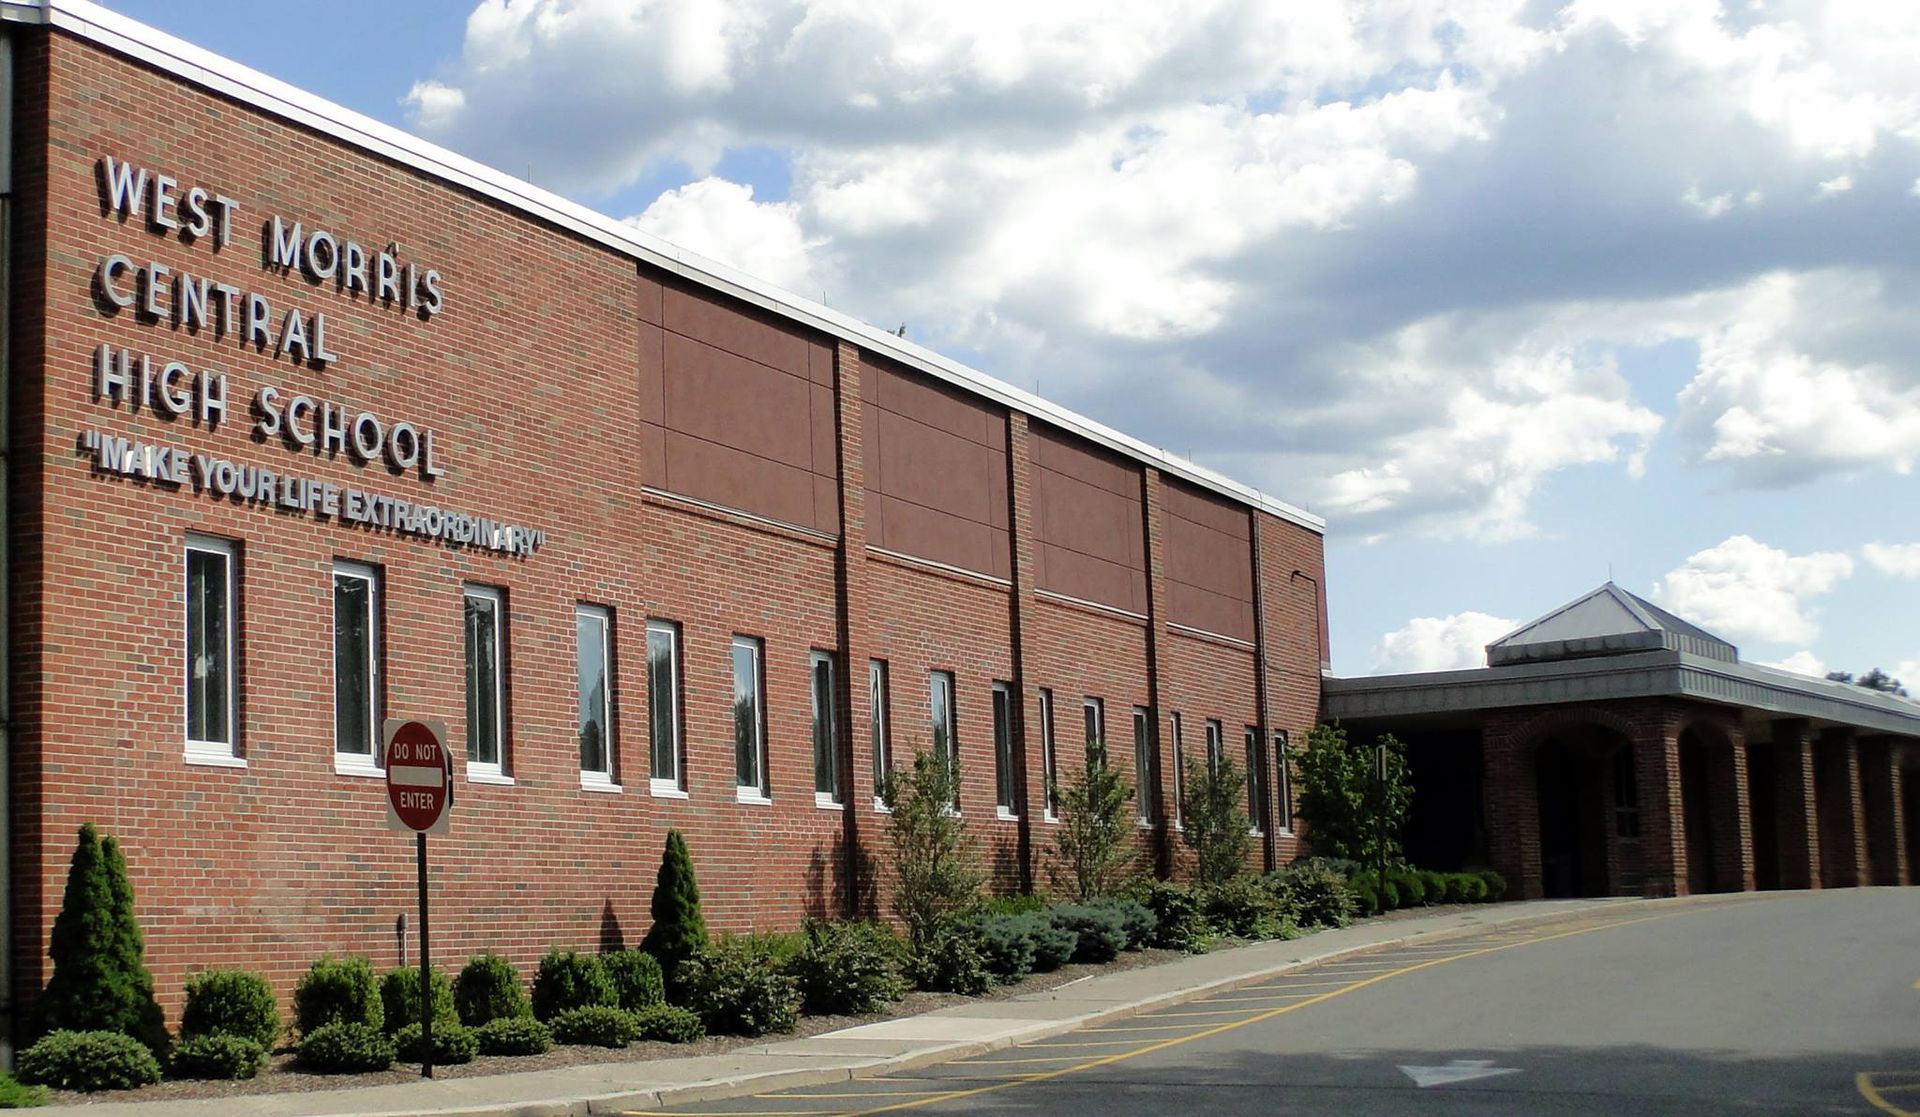 a photo of west morris central high school in New Jersey